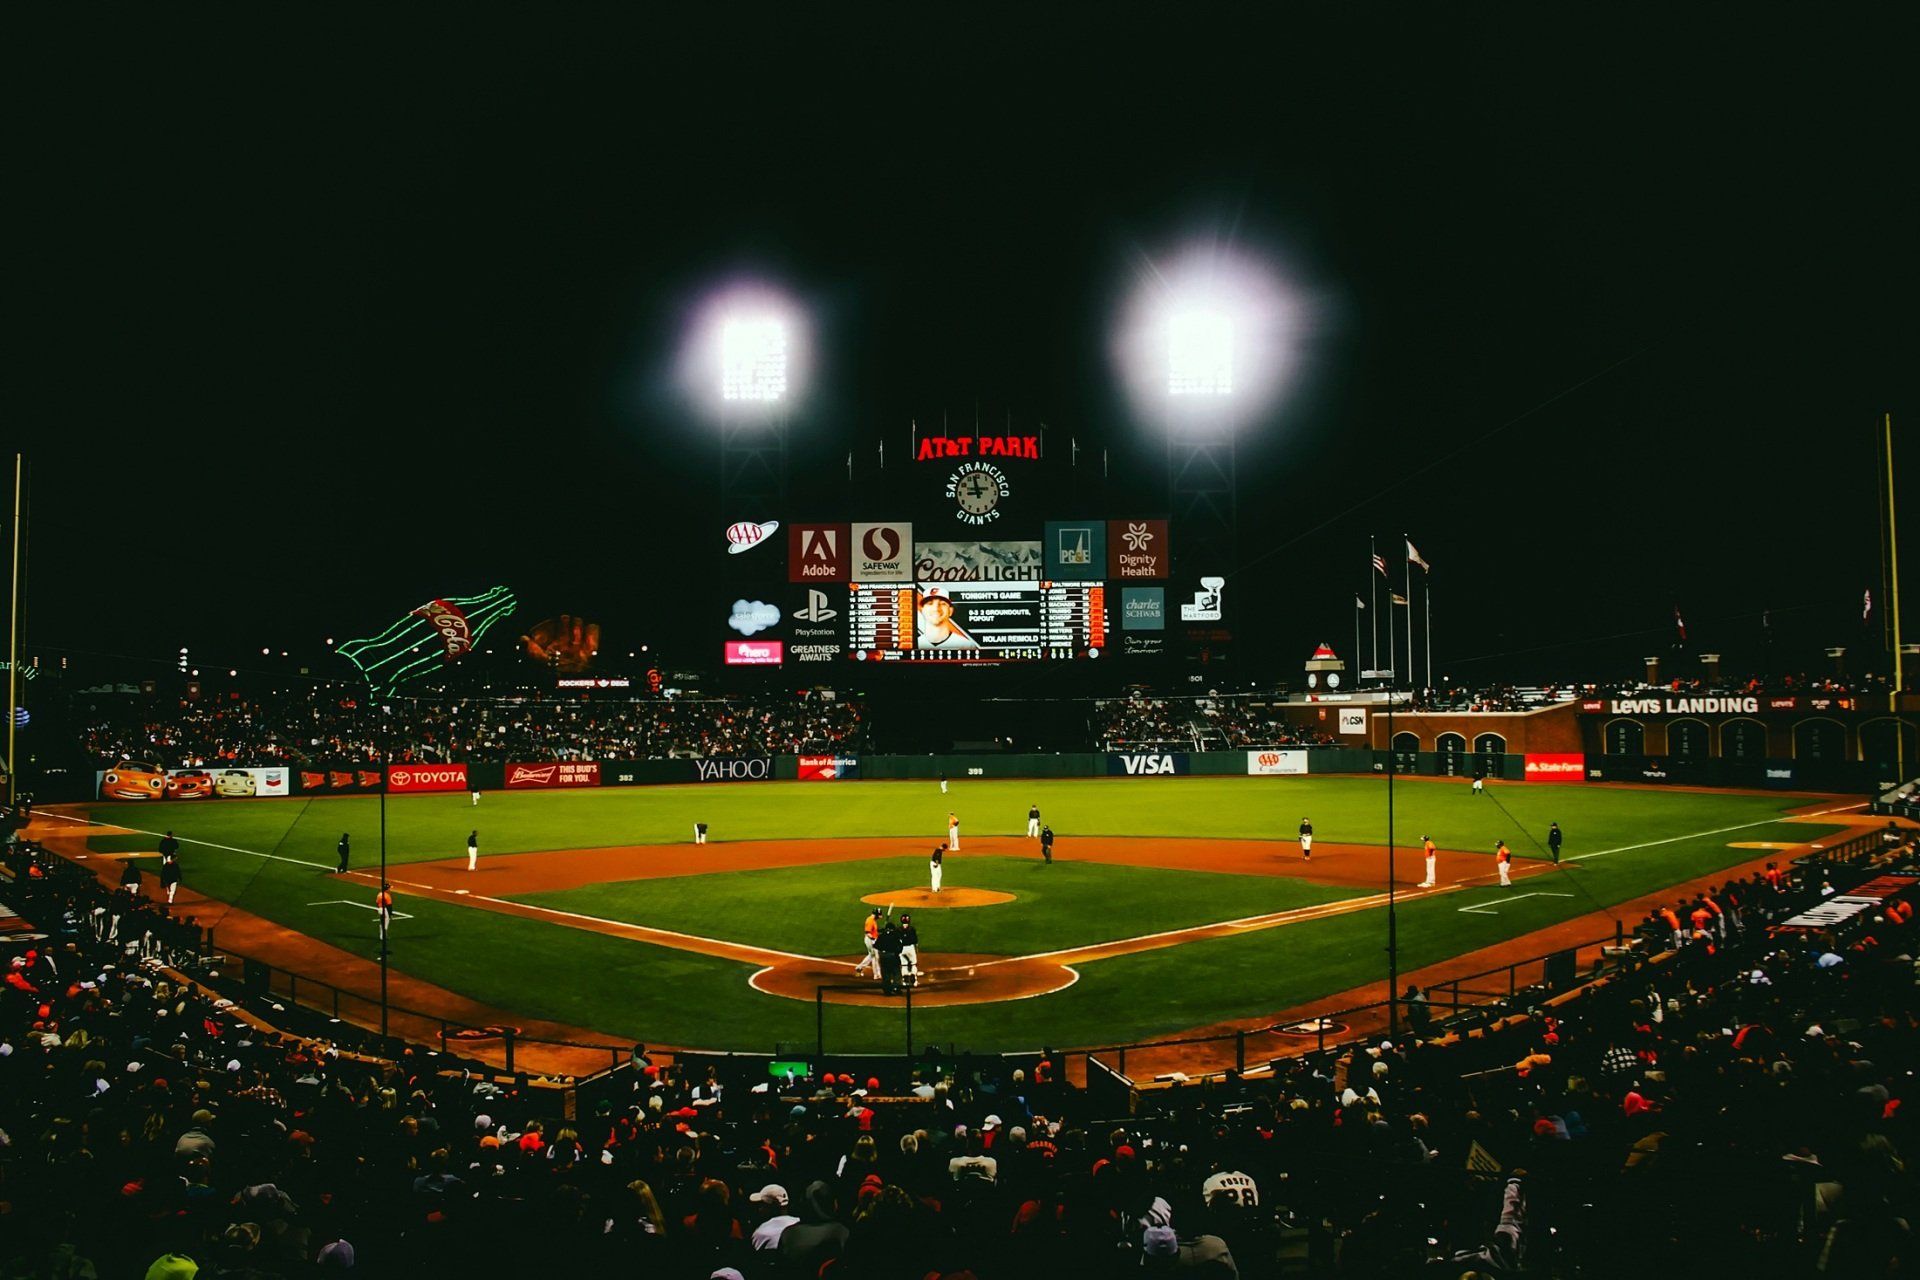 A baseball game is being played in a stadium at night that needs legal serivces